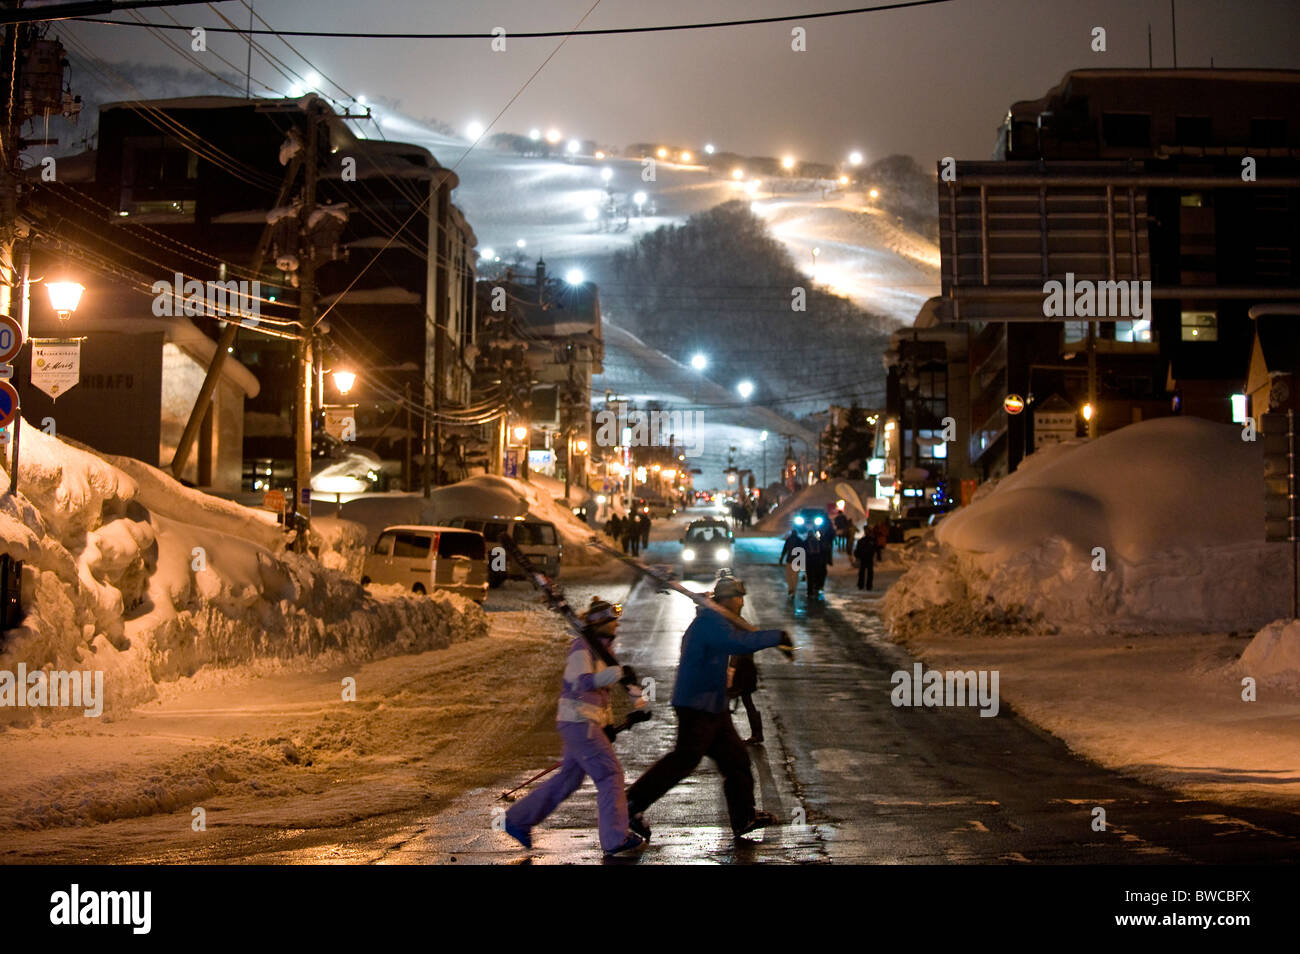 The lights of Grand Hirafu ski resort in the distance, boarders and skiers cross the main street at Niseko, Japan Stock Photo